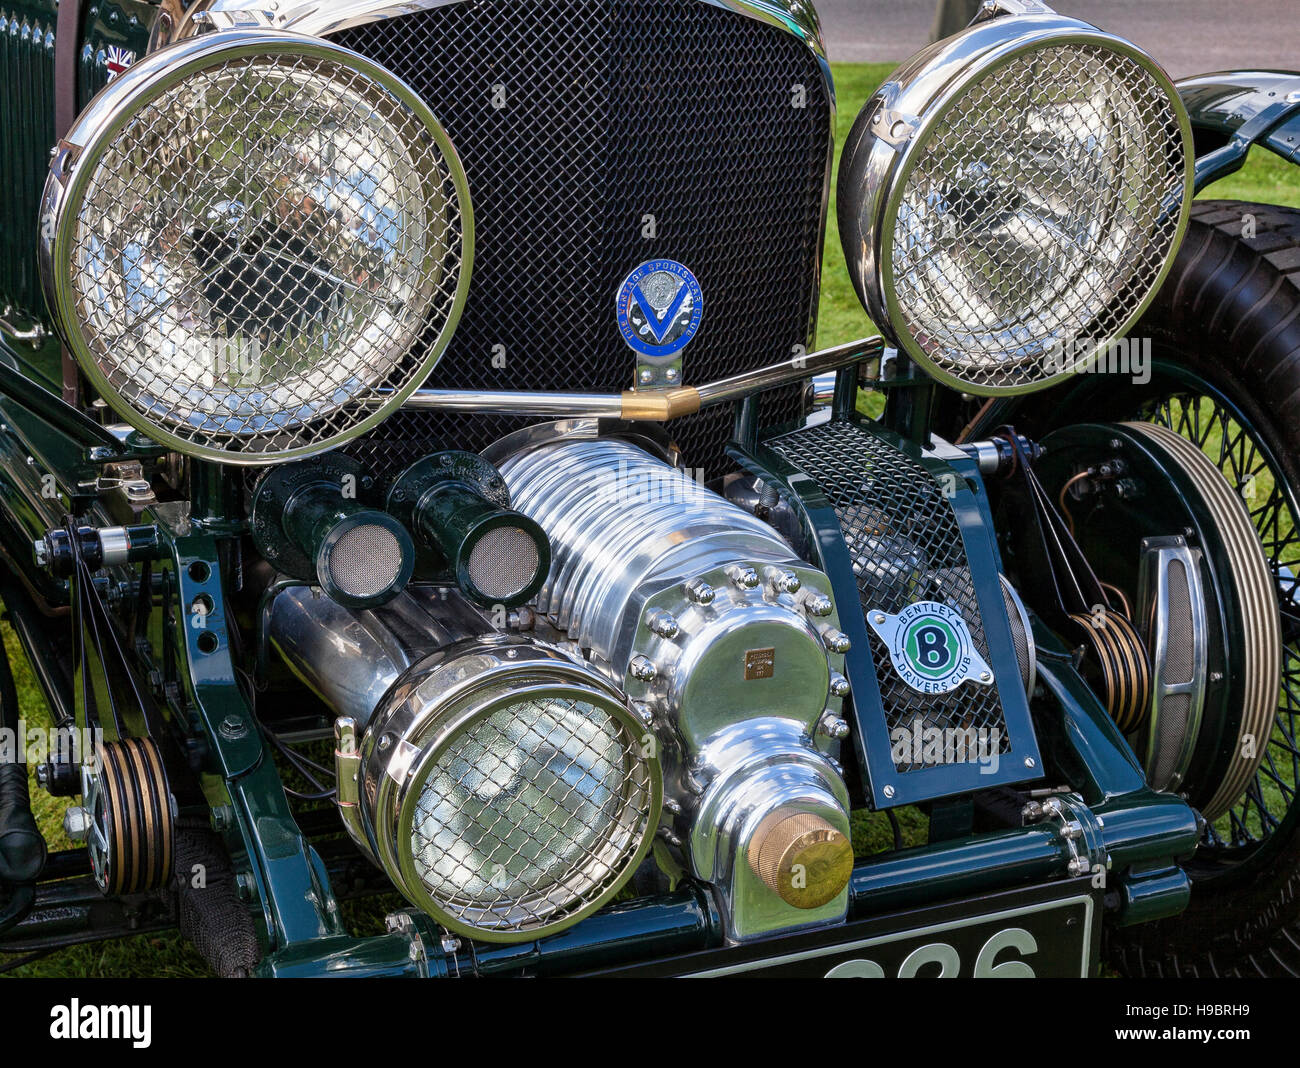 4.5 litre Petersen supercharged classic Bentley, possibly replica, at car show Stock Photo